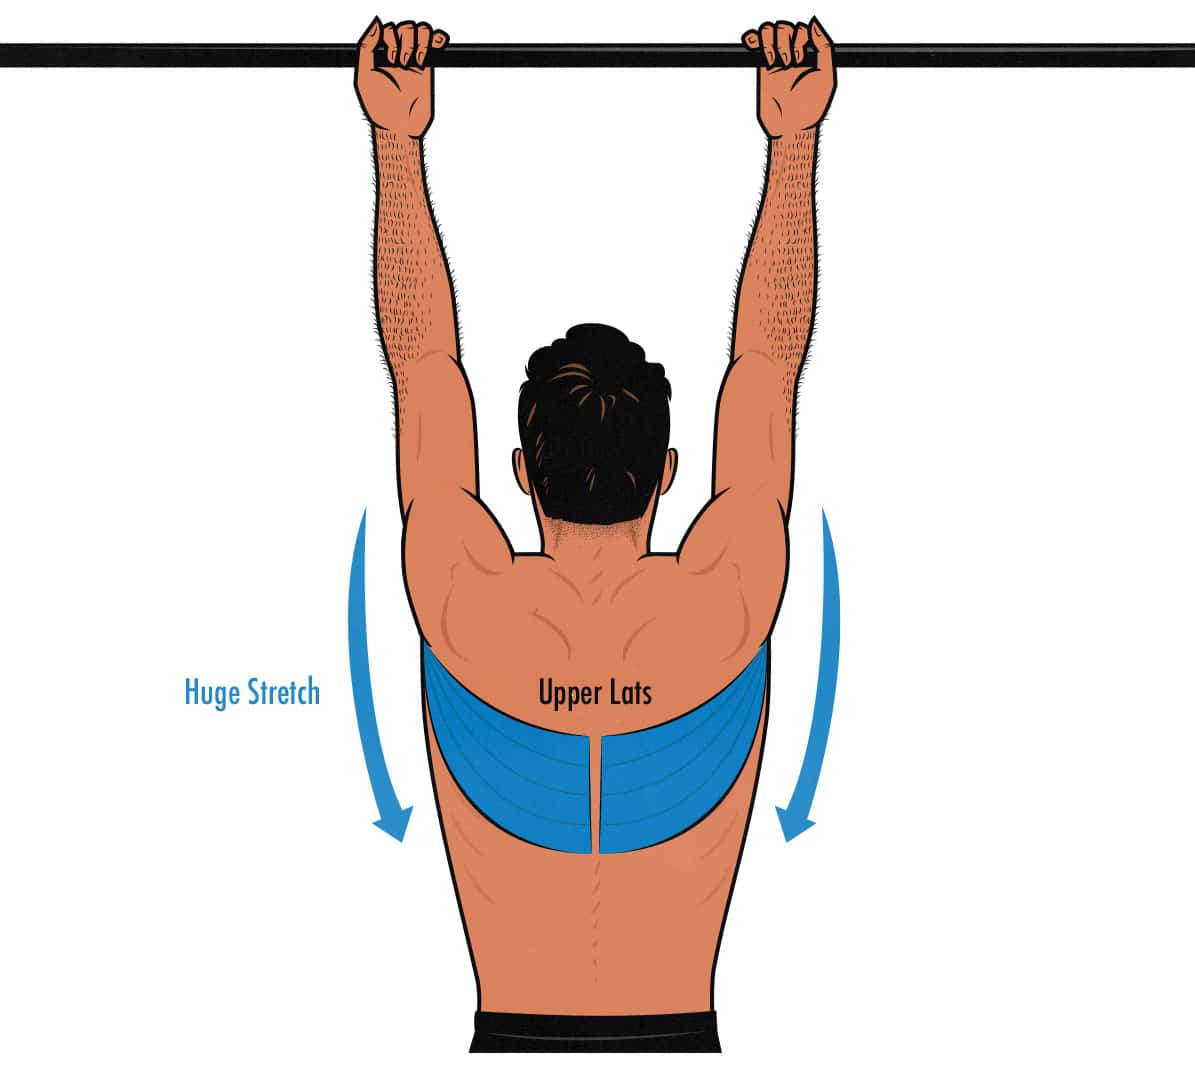 Diagram showing a bodybuilder targeting his upper lats with chin-ups.